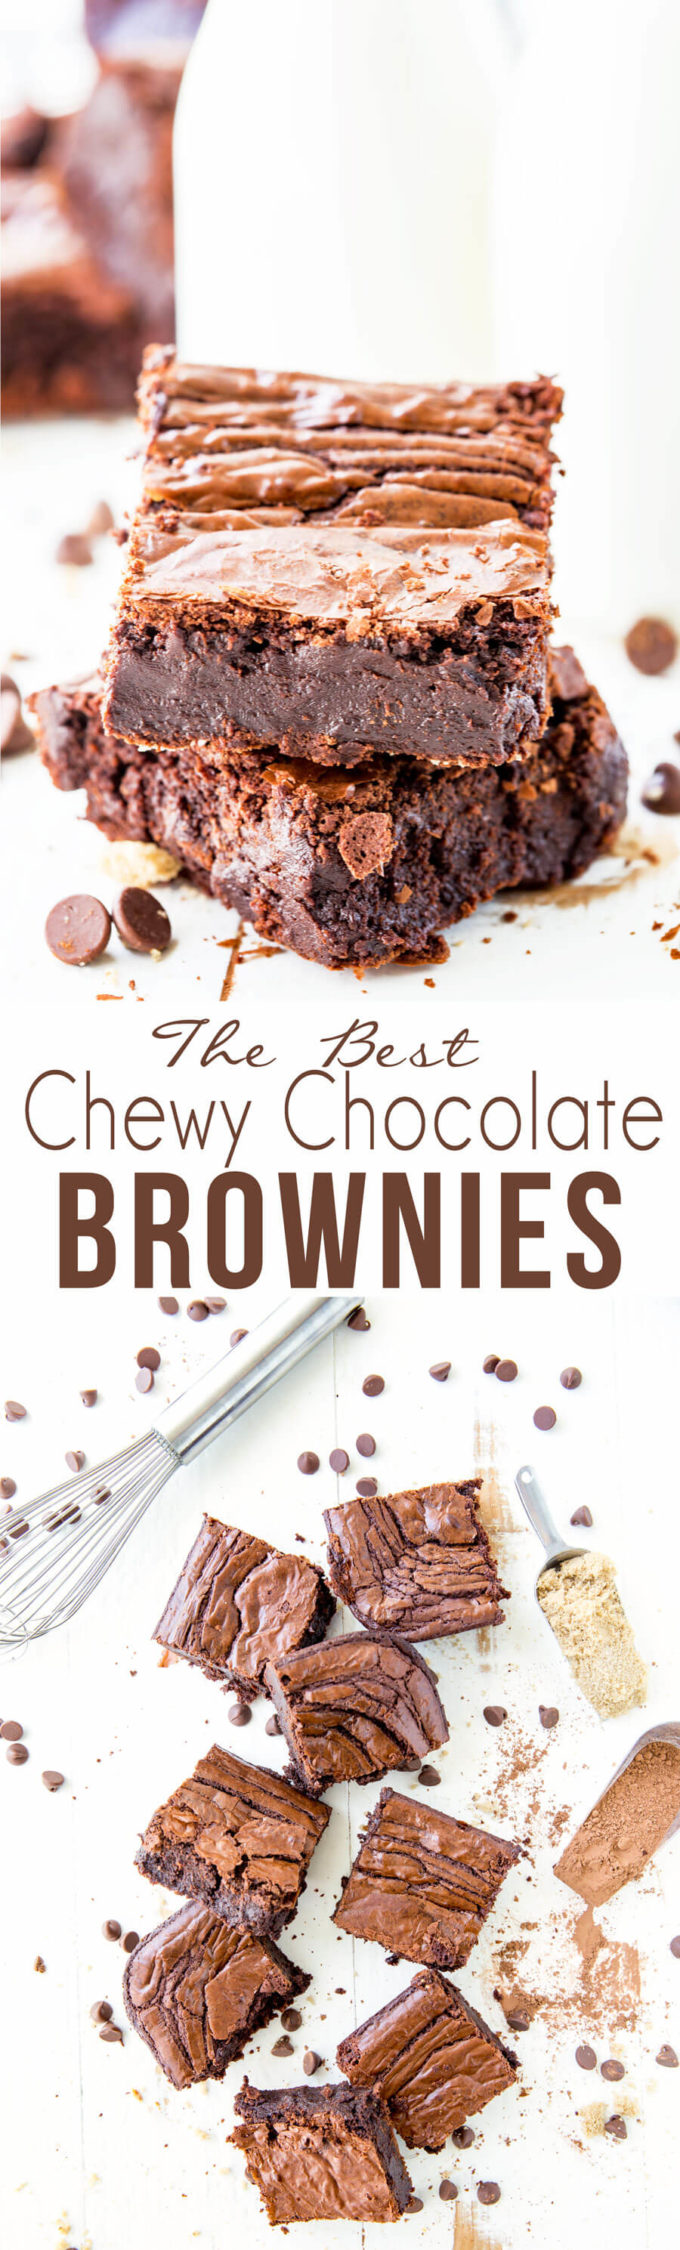 The best chewy chocolate brownies: These are the right kind of indulgence. 